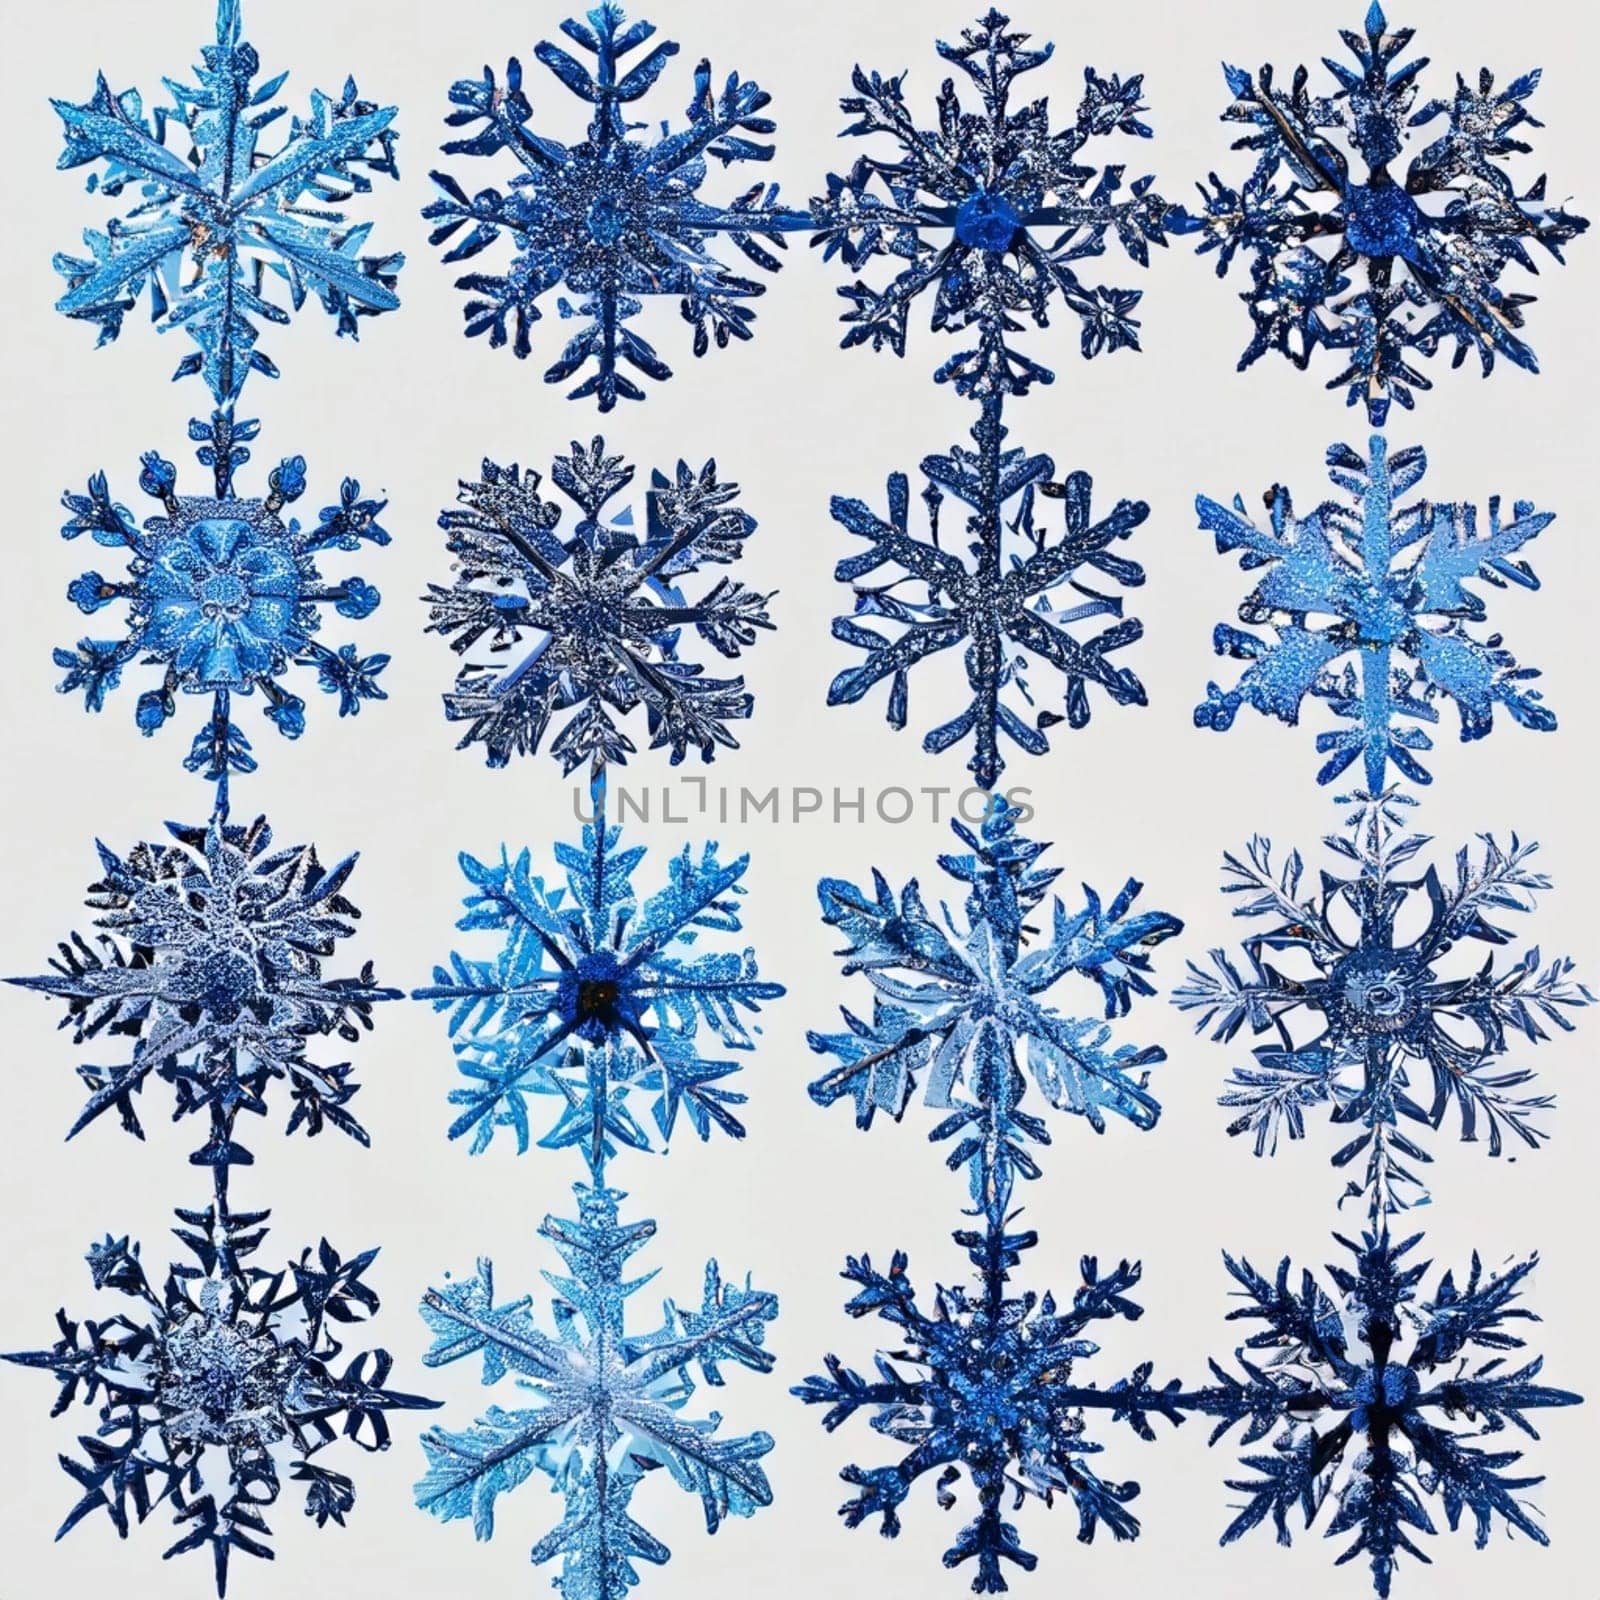 set of snowflakes. global colors used. elements grouped. Snowflake Decoration Christmas Winter set of snowflakes features unique and intricate designs, capturing the beauty and wonder of winter. High quality image